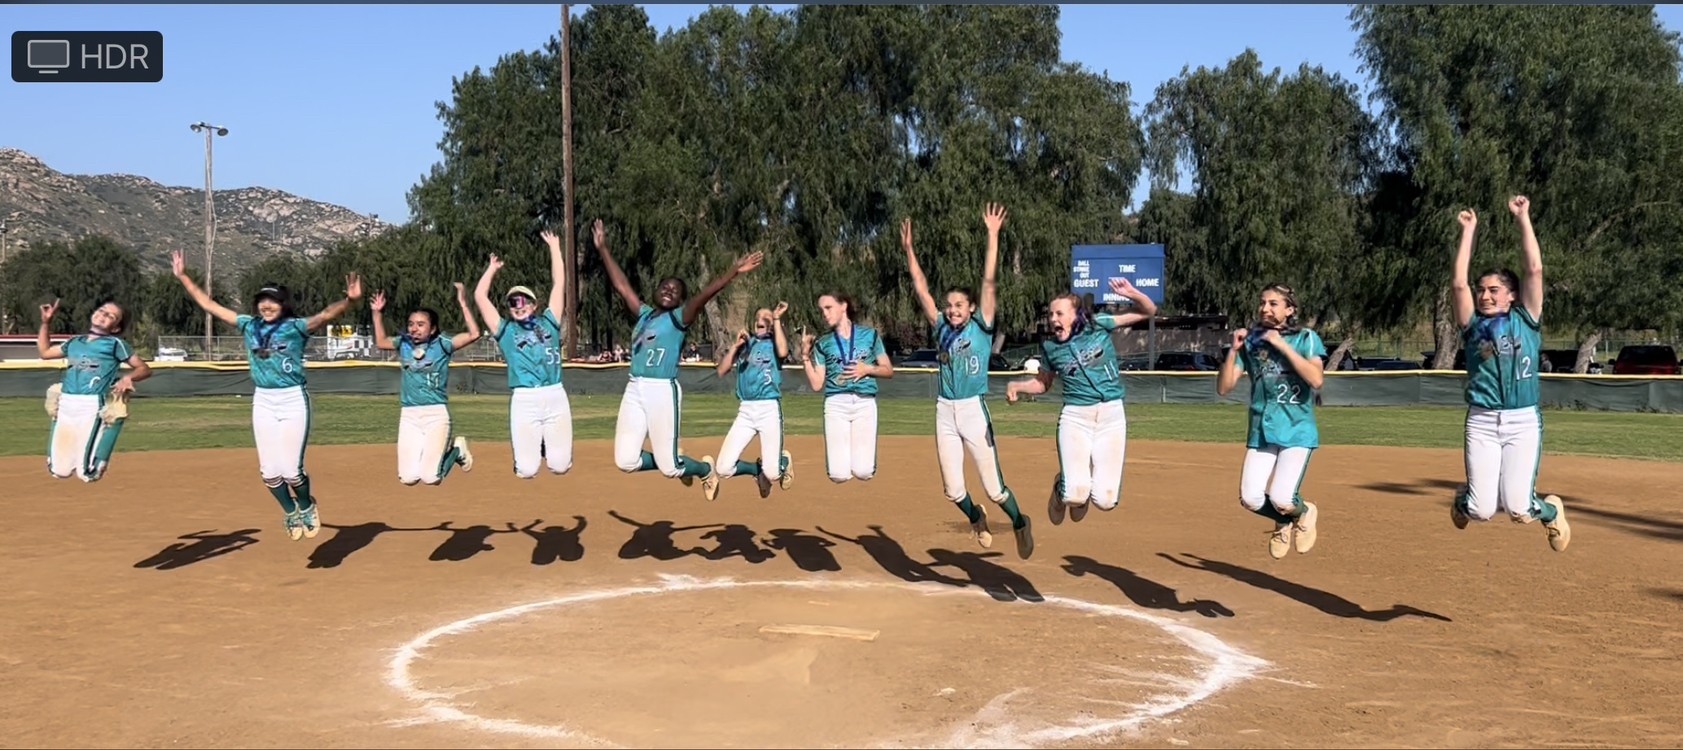 Power Surge Berndes Champions Earth Day Tourney 